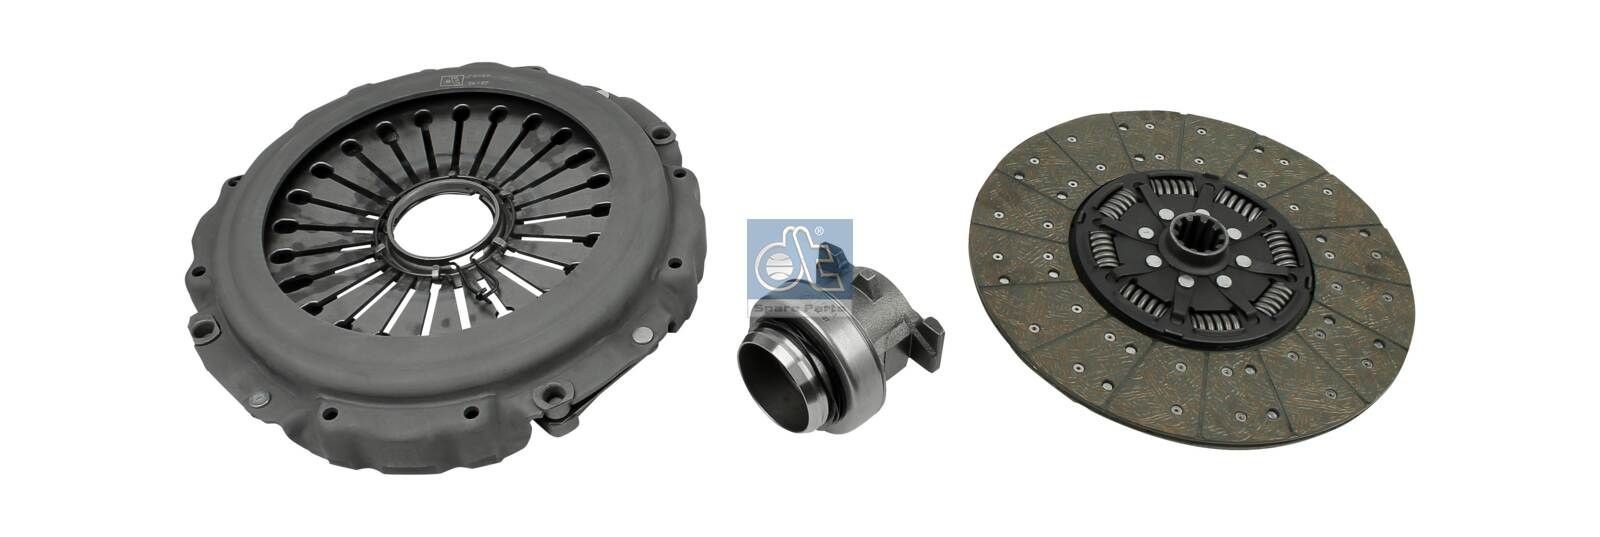 3400 107 031 DT Spare Parts 400mm Ø: 400mm Clutch replacement kit 7.90512 buy